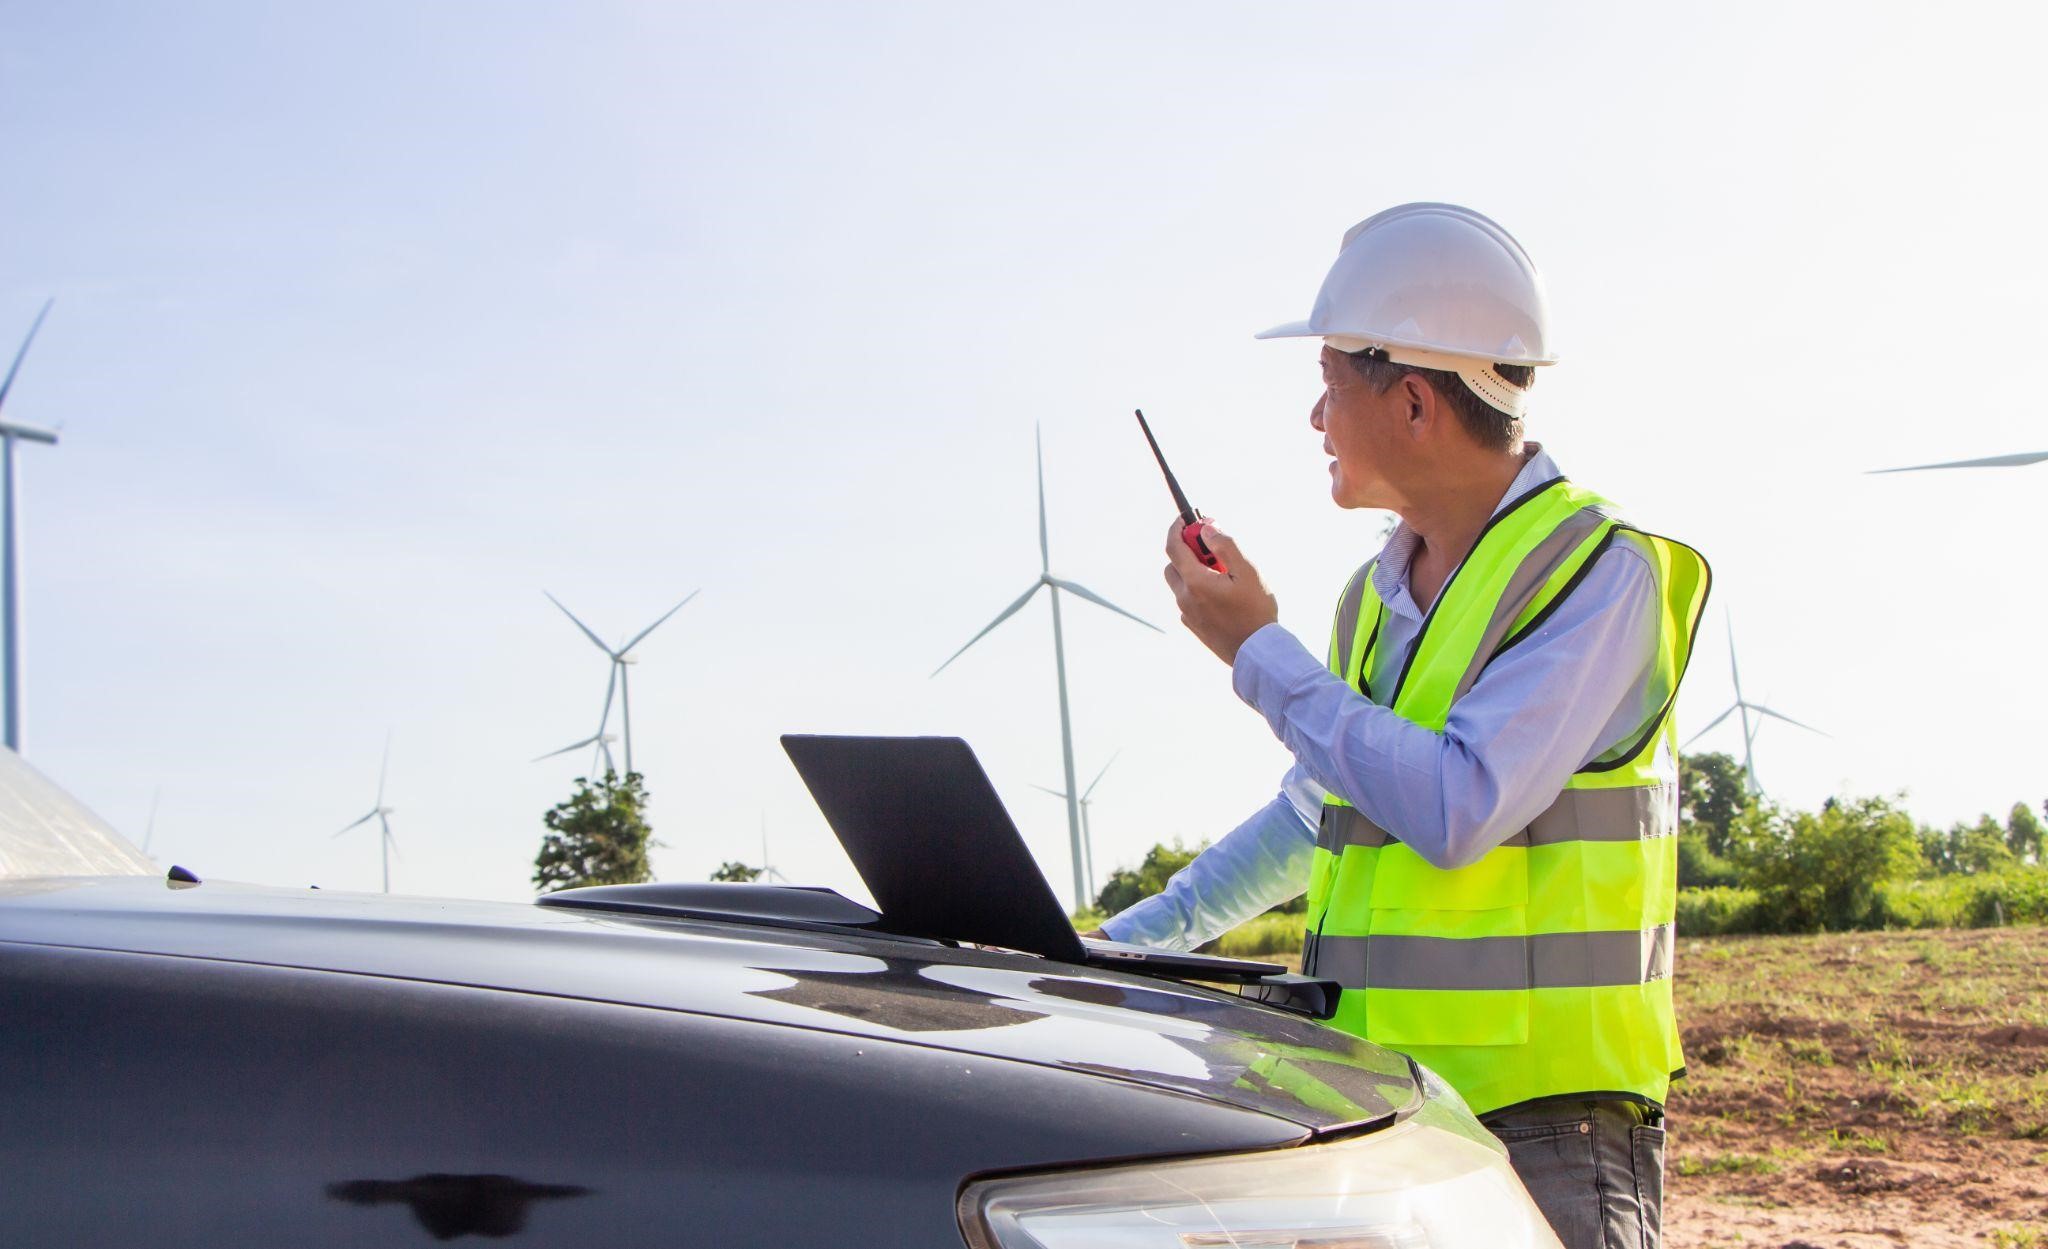 Find the right wind turbine technician career for you.